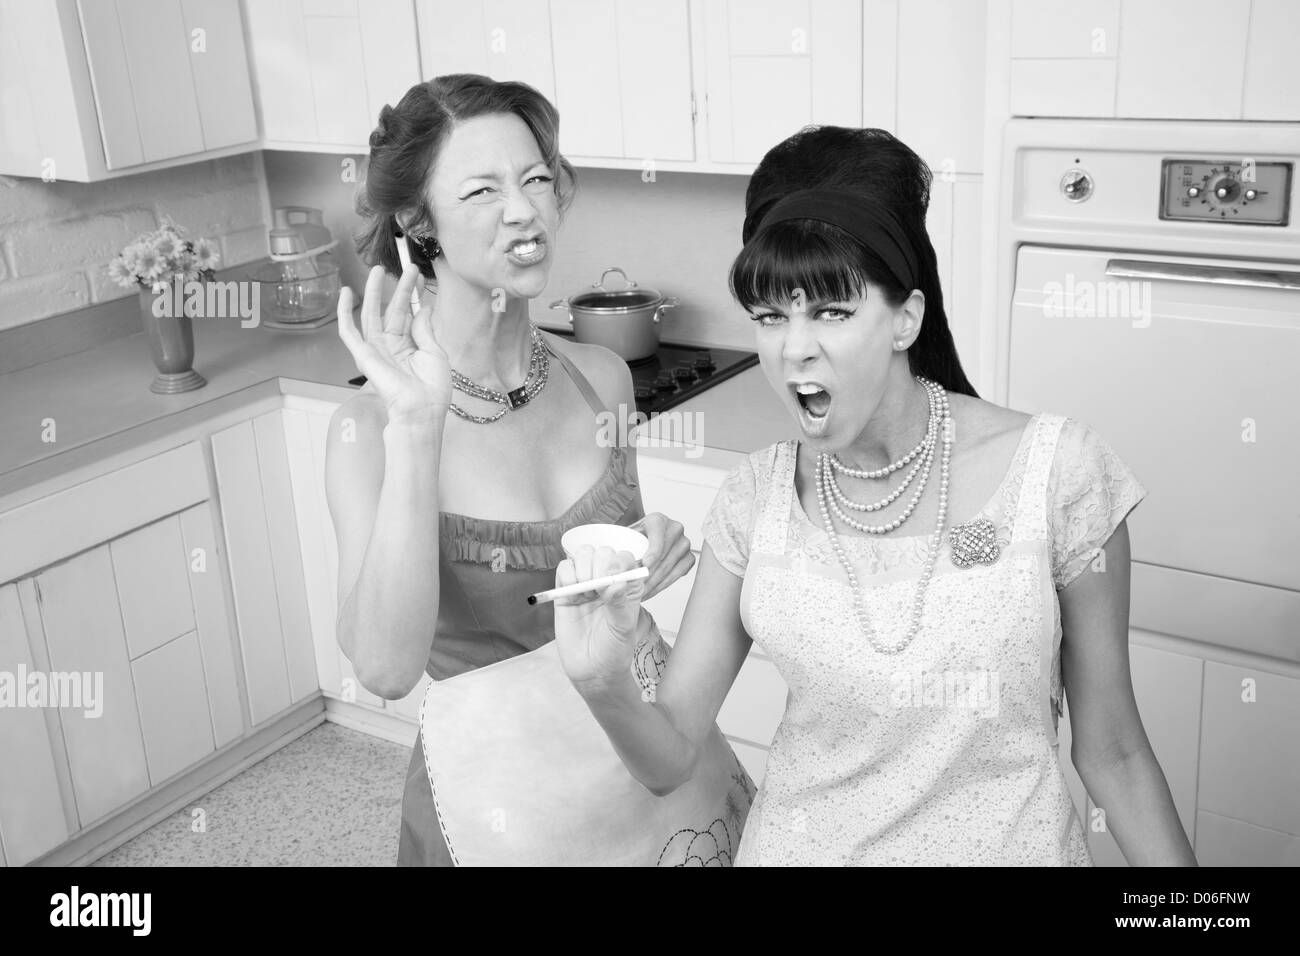 Two sassy housewives smoking cigarettes in the kitchen Stock Photo